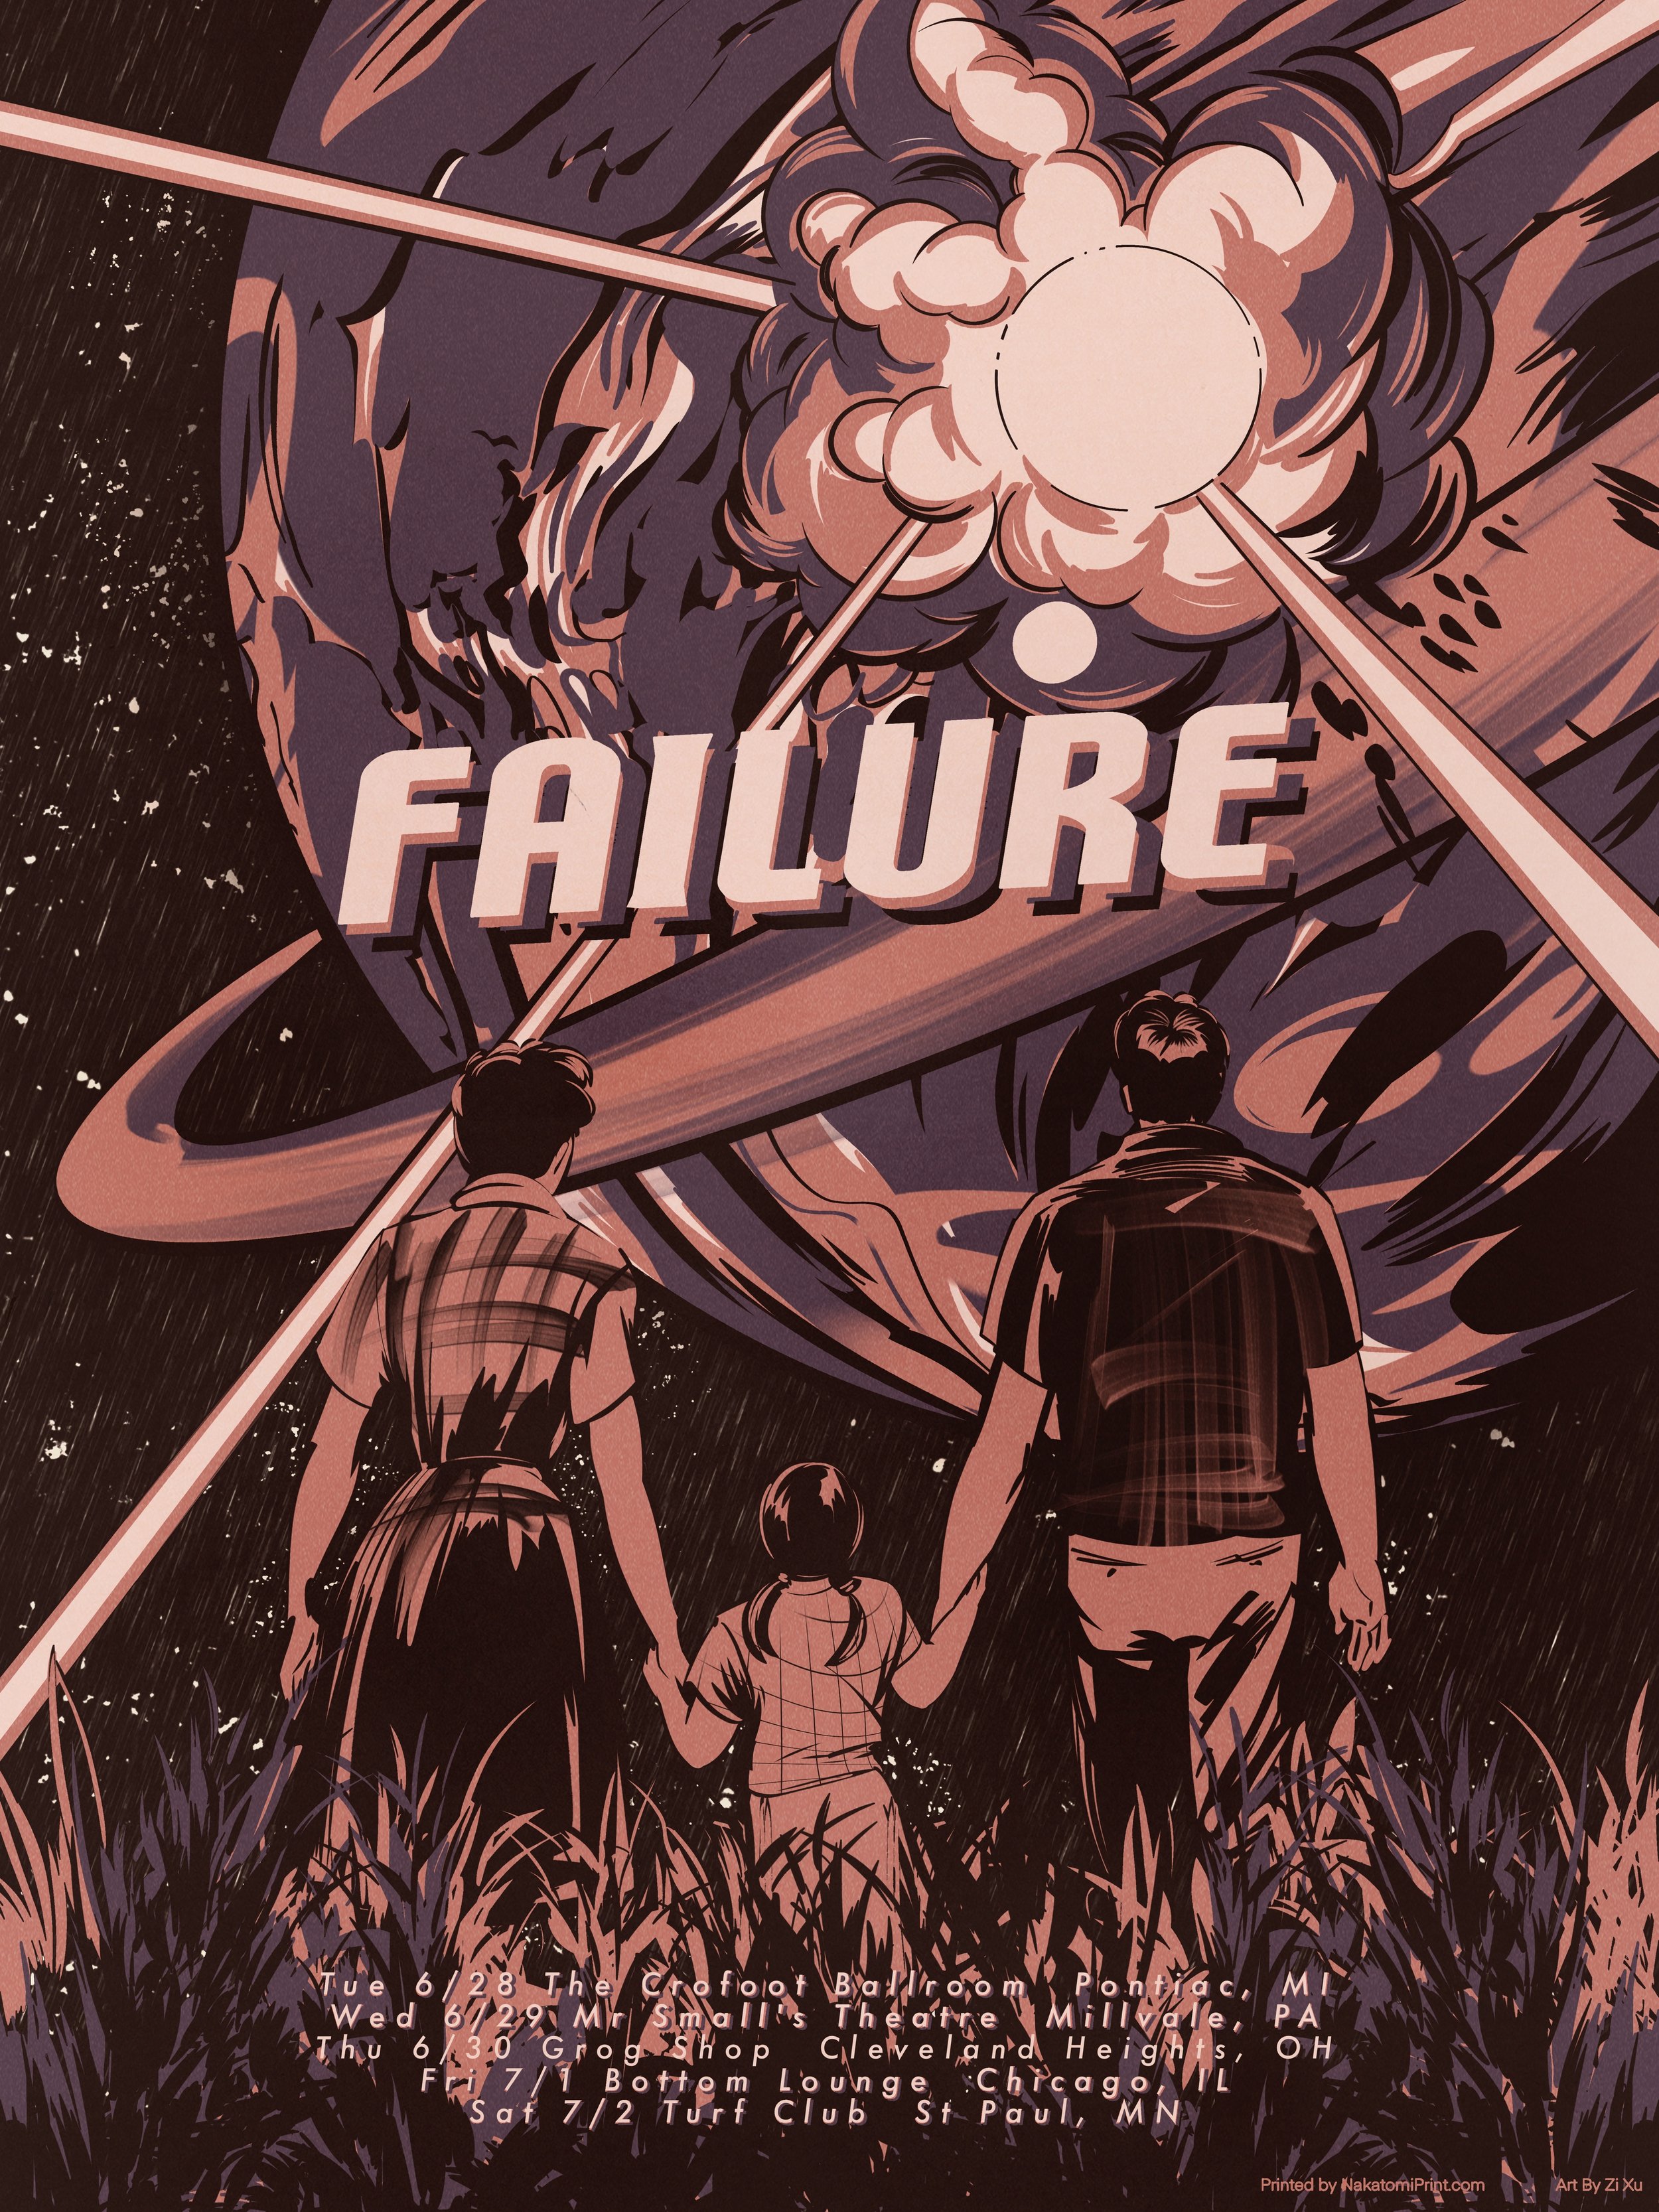   Failure - 2022 Tour Poster   Client: Failure &amp; Nakatomi, Inc. (officially licensed) 